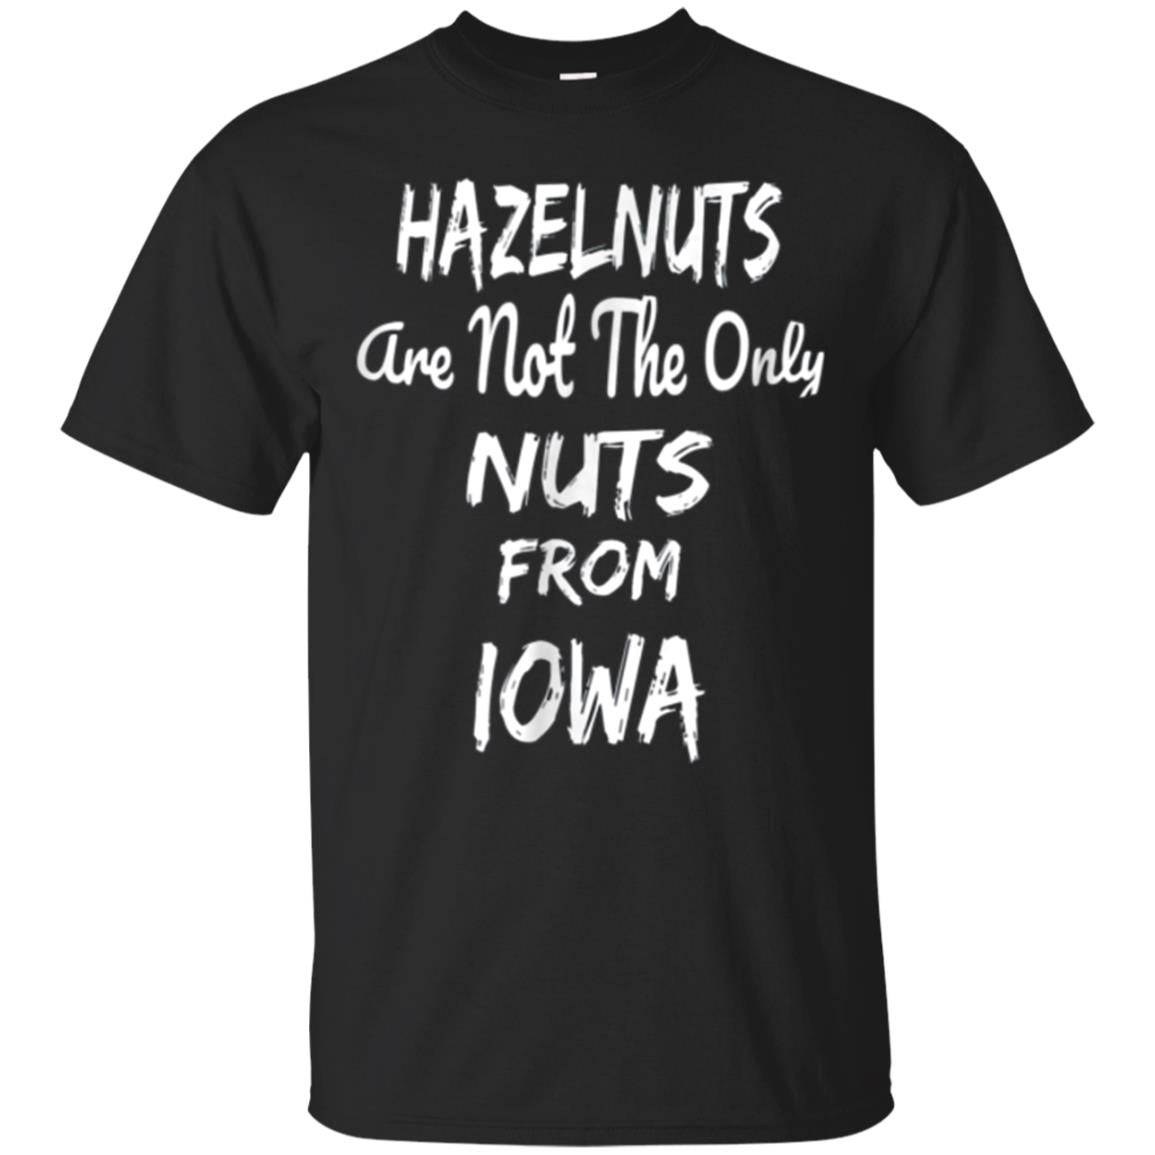 Hazelnuts Not The Only Nuts From Iowa T-shirt